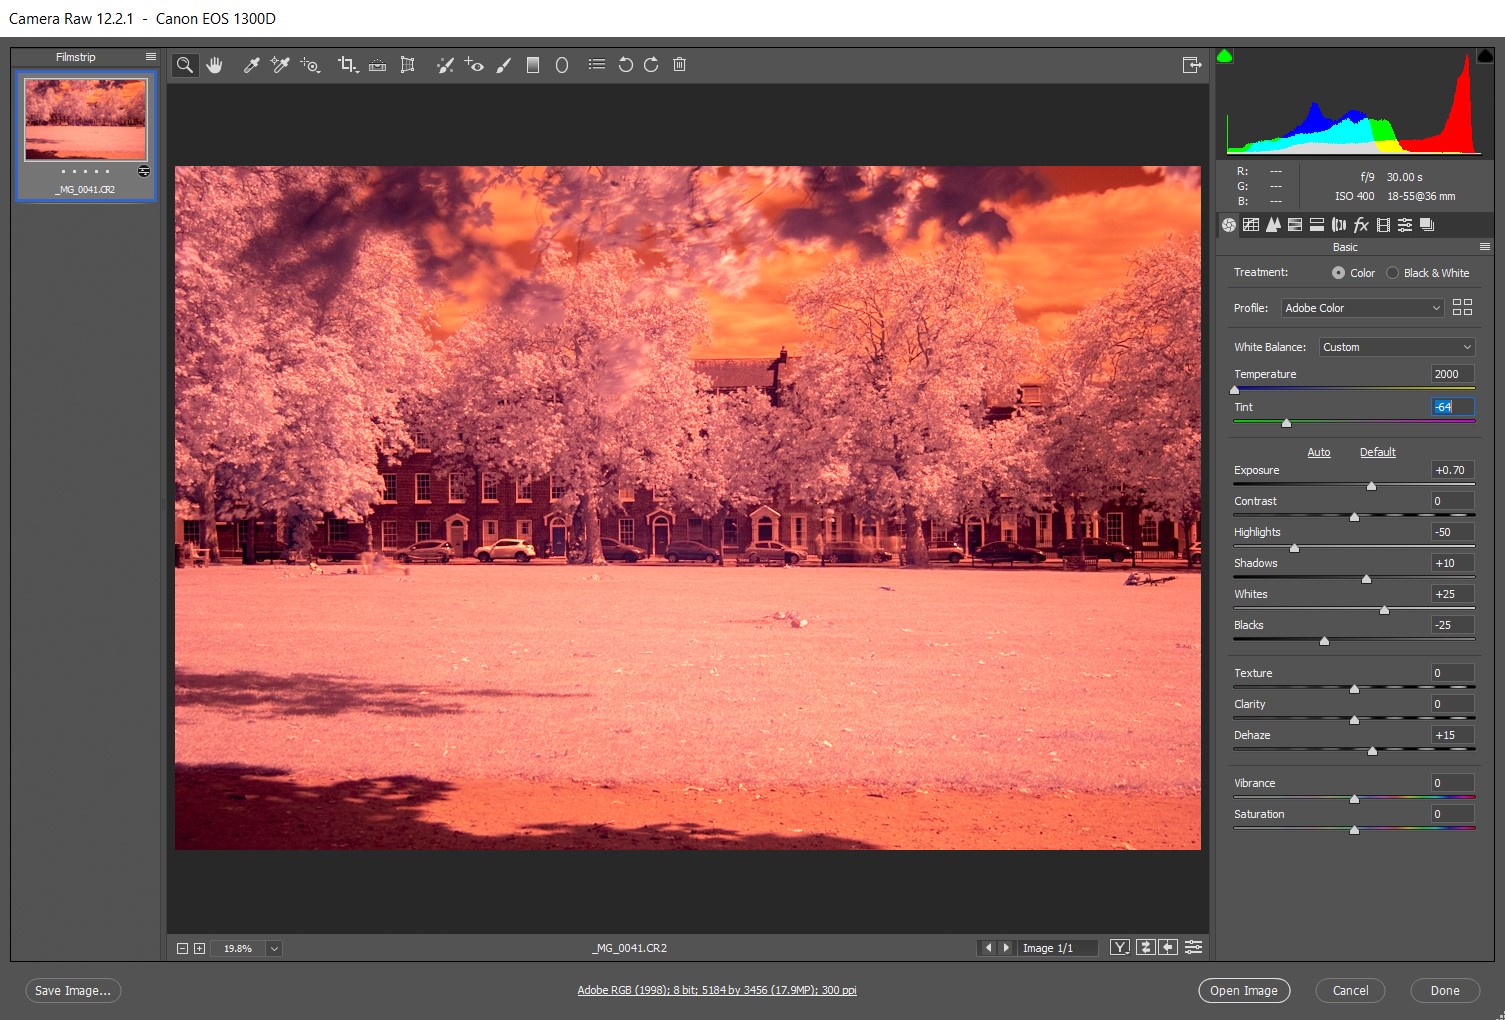 Infrared Photography With Filter on DSLR. Infrared photo edited in "Camera RAW".